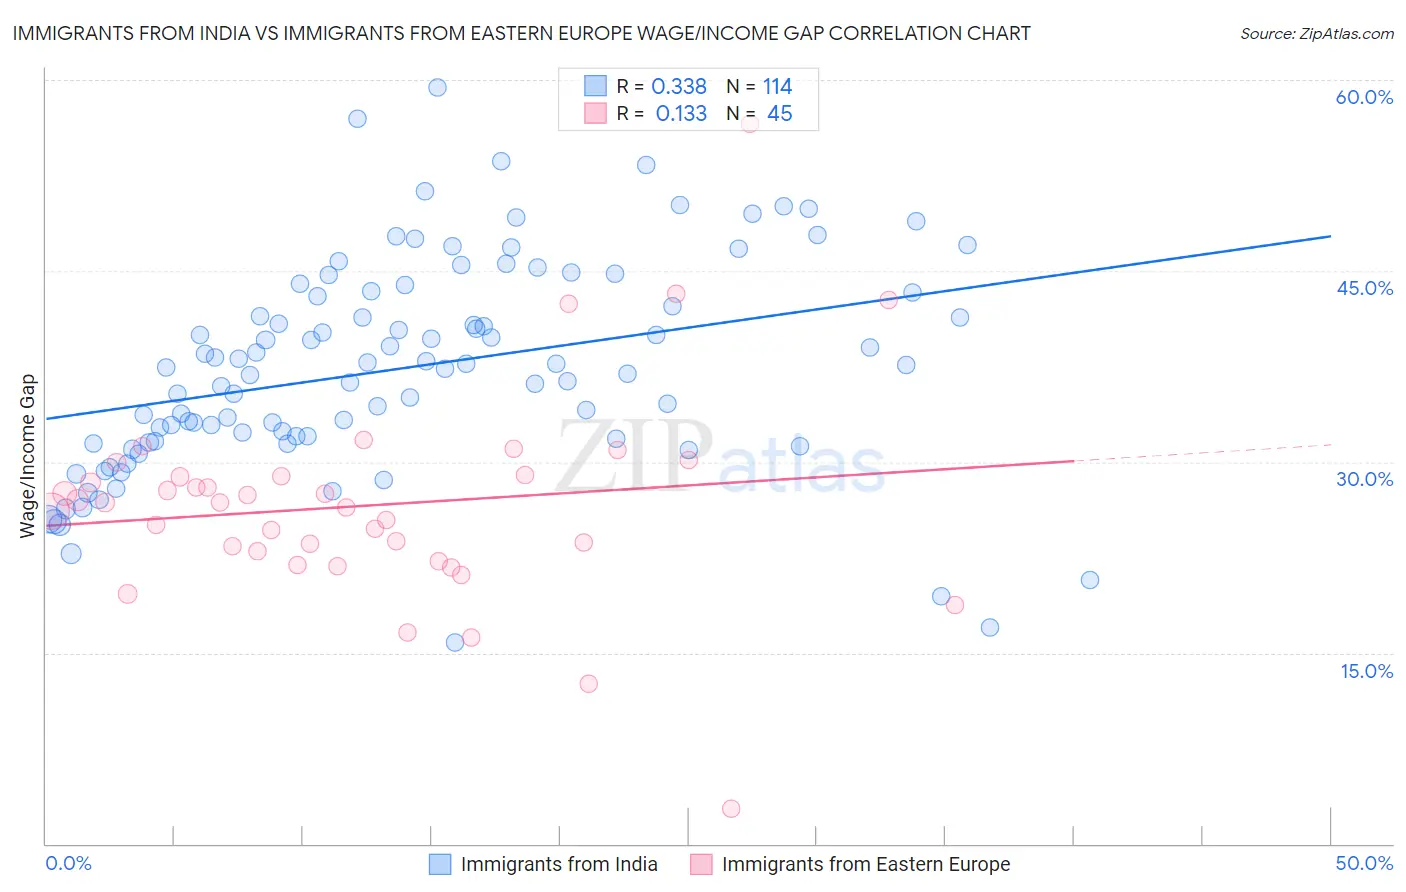 Immigrants from India vs Immigrants from Eastern Europe Wage/Income Gap